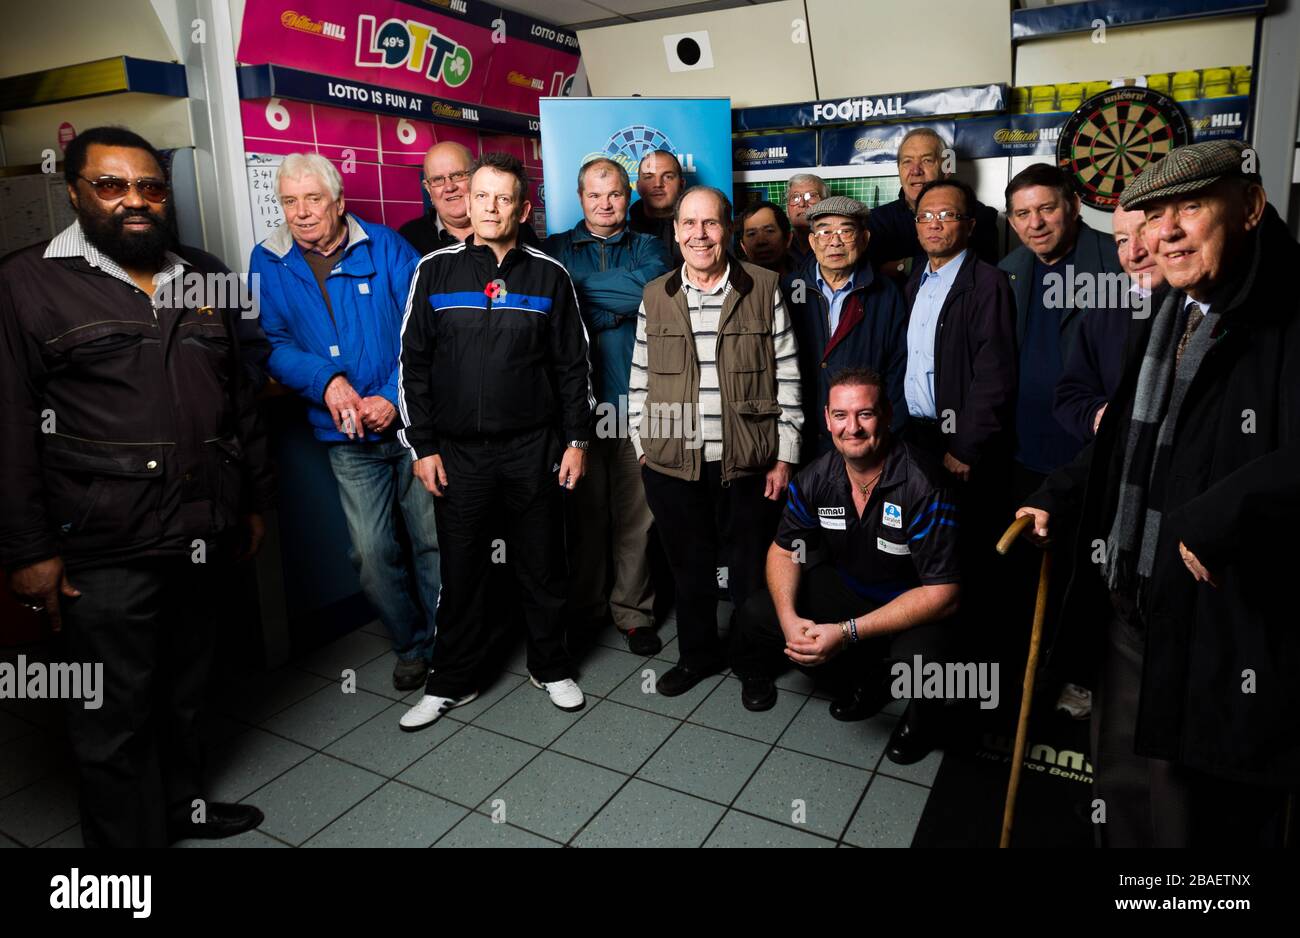 Dean Winstanley poses with members of the public at the William Hill shop in Wolverhampton Stock Photo